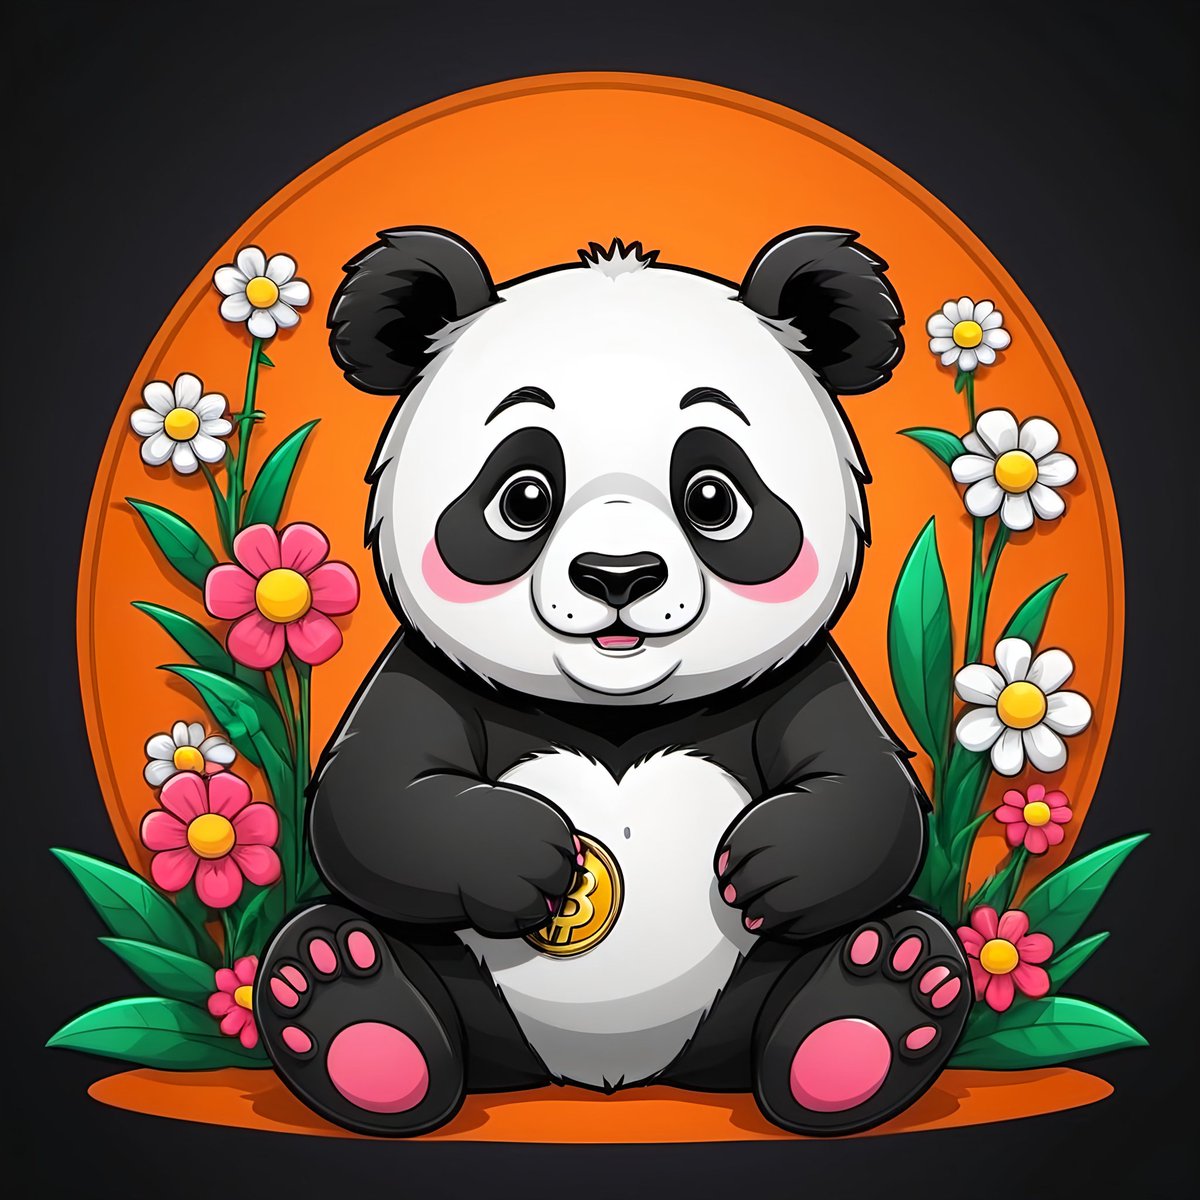 ✨ Good morning🥰
💫 Happy weekend🫶
#PandaTale 
🙈New Drop Panda🤍

Price: 1 #Matic just 
#polygon 

#OpenSeaNFT #nftcreator #nftcollector #crypto
#SupportEachOther 

Link:⬇️
opensea.io/assets/matic/0…